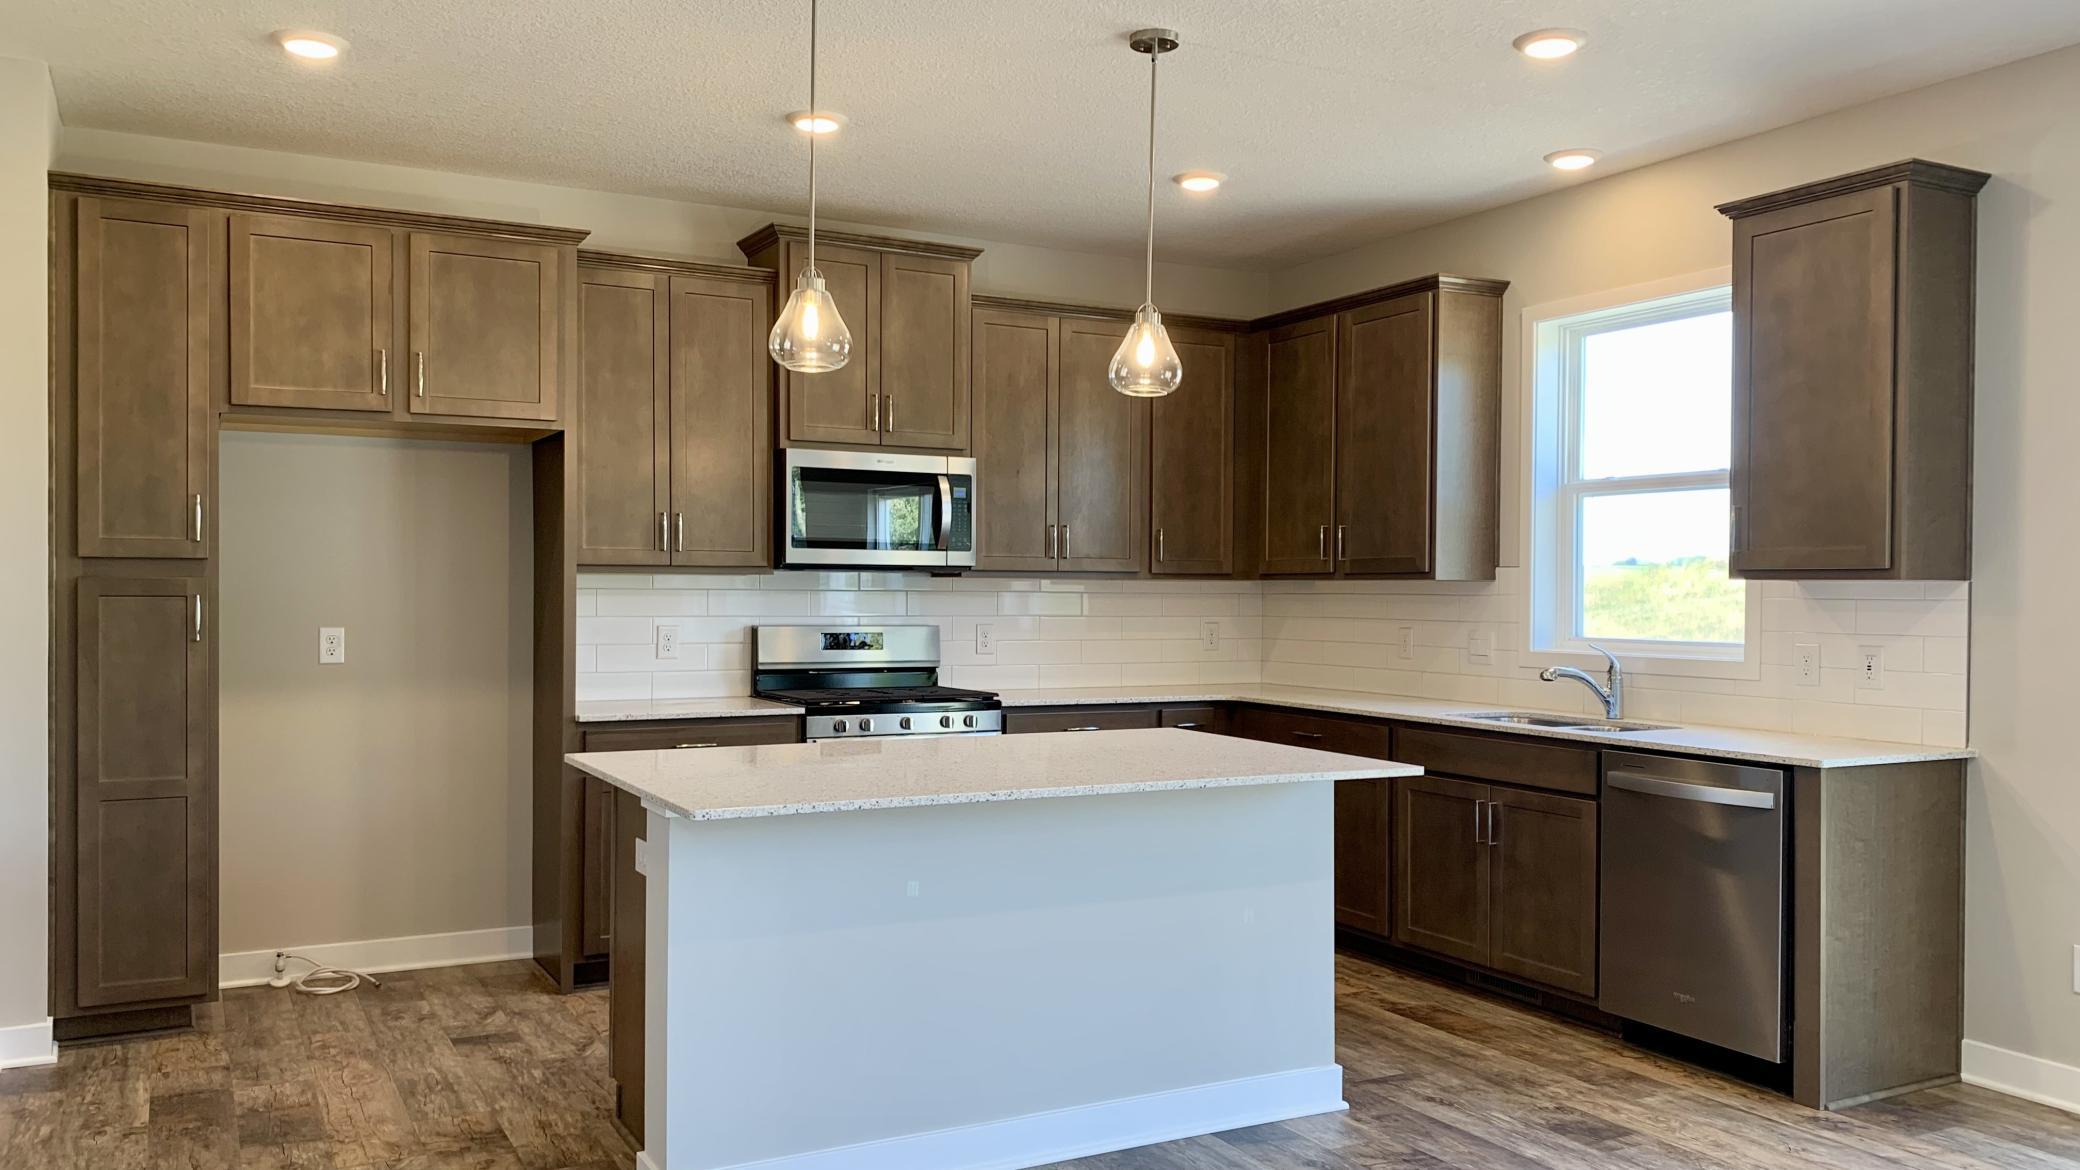 Welcome to the Bridgewater! Just completed 5 bedroom, new construction home located in desired Chaska. Nestled amongst mature trees, ponds and conservation while still conveniently close to all of the conveniences of shopping, dining, schools & more!